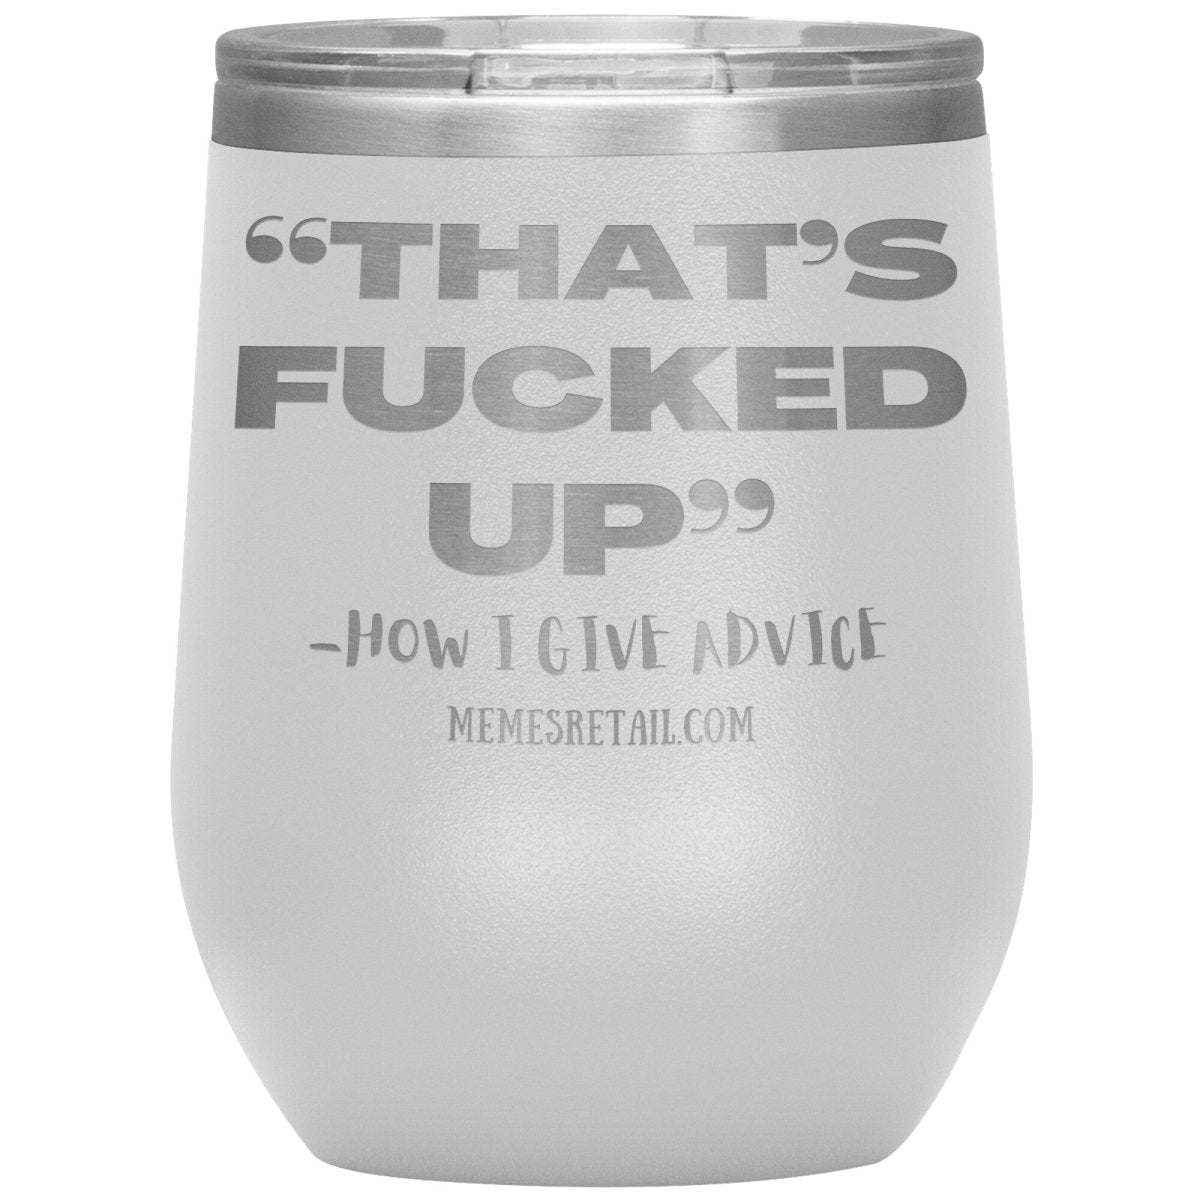 “That’s Fucked Up” -how I give advice Tumblers, 12oz Wine Insulated Tumbler / White - MemesRetail.com